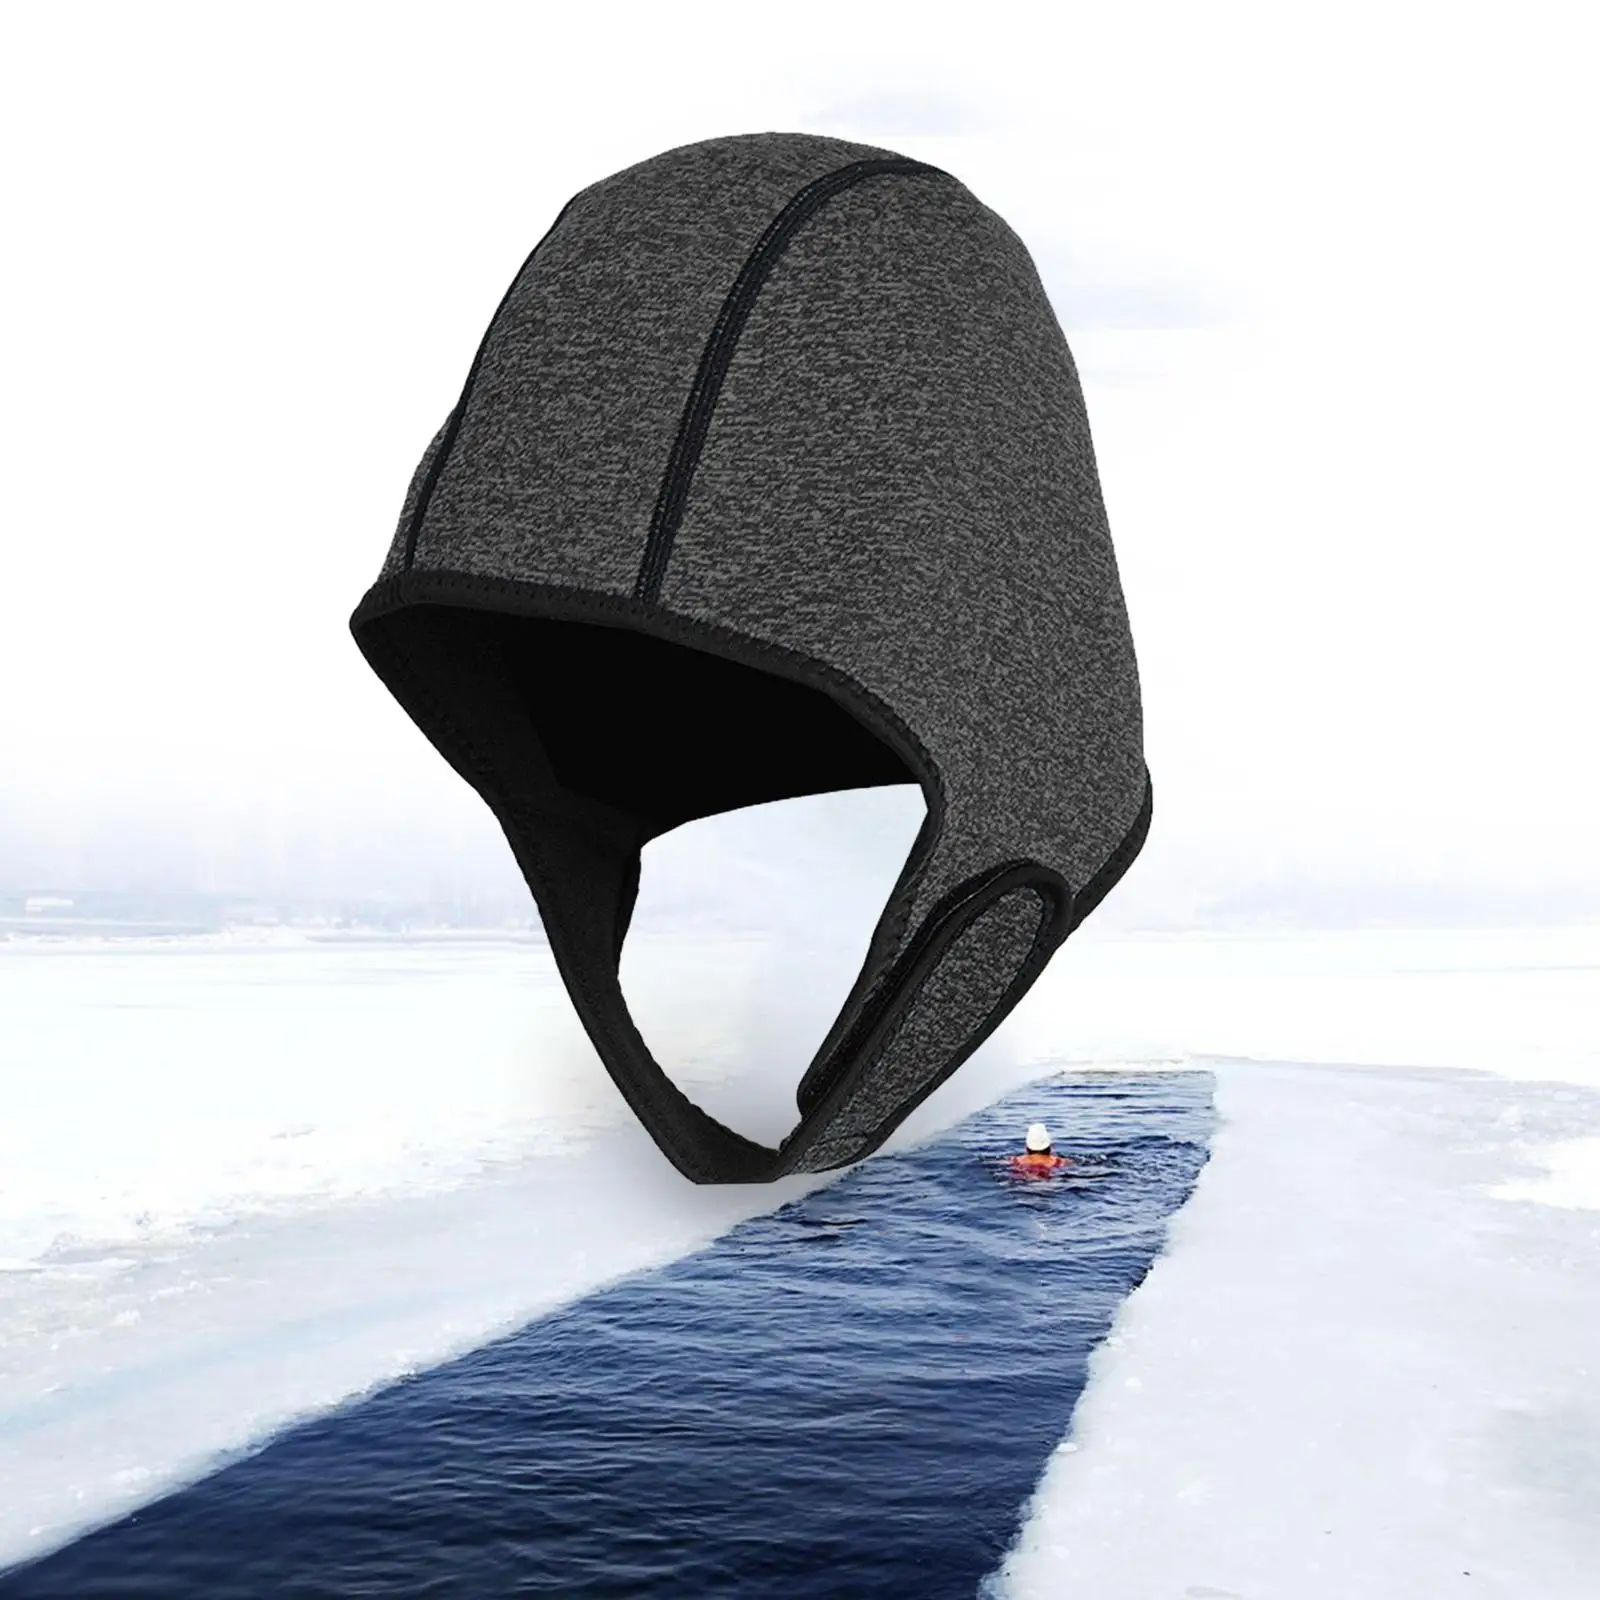 2mm Neoprene Diving Hood Scuba Diving Hood Cap with Chin Strap Thermal Hood Swimming Cap for Snorkeling Underwater Surfing